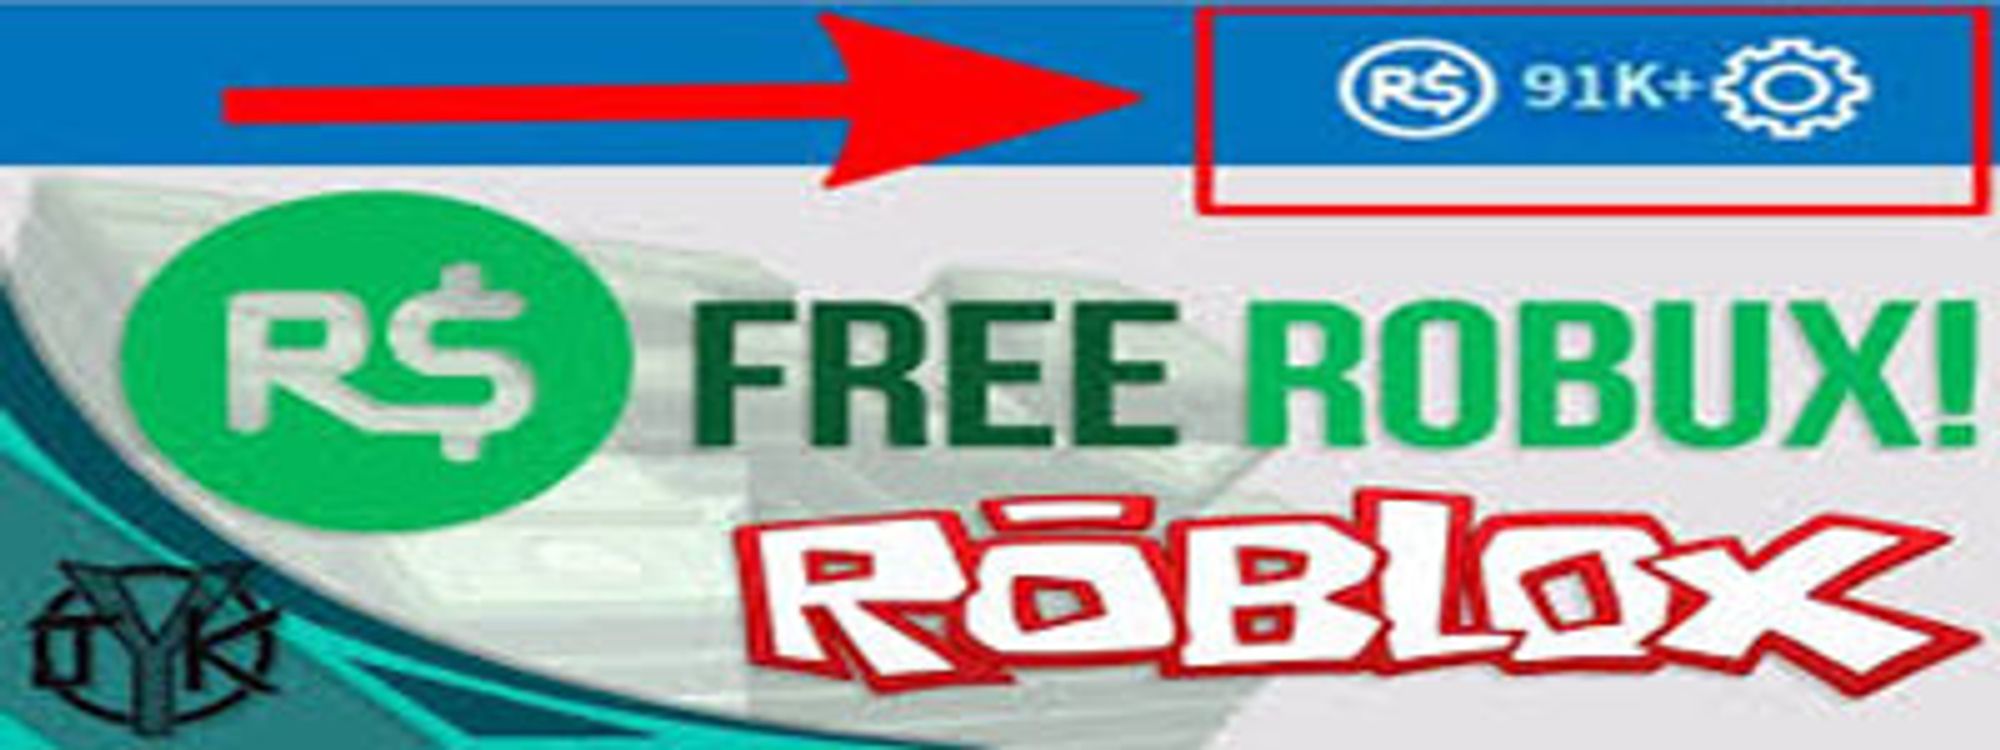 Roblox Robux Free Roblox Robux Codes With Skins Password Account 2020 - robux hack for iphone